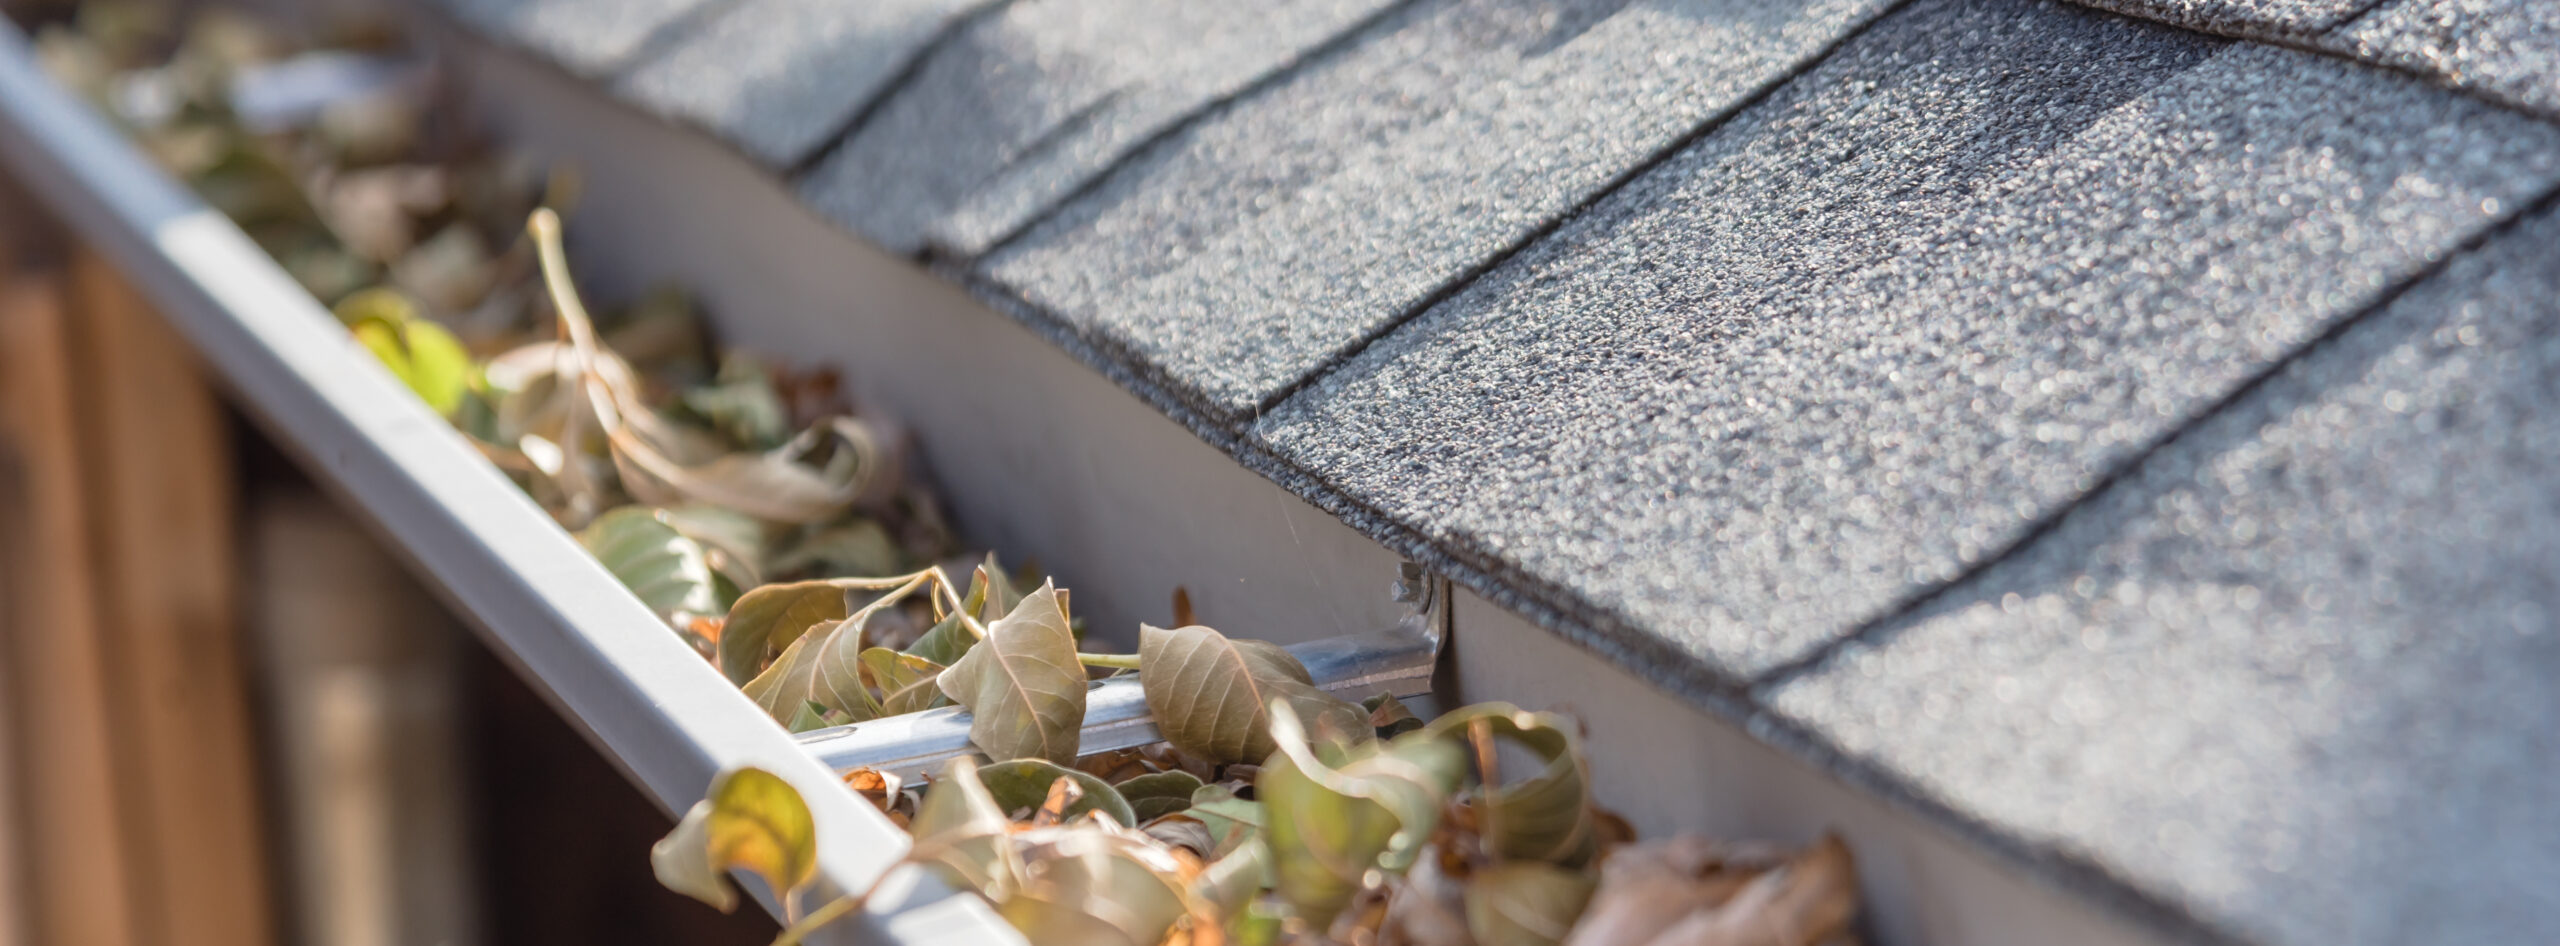 How often to clean out gutter systems